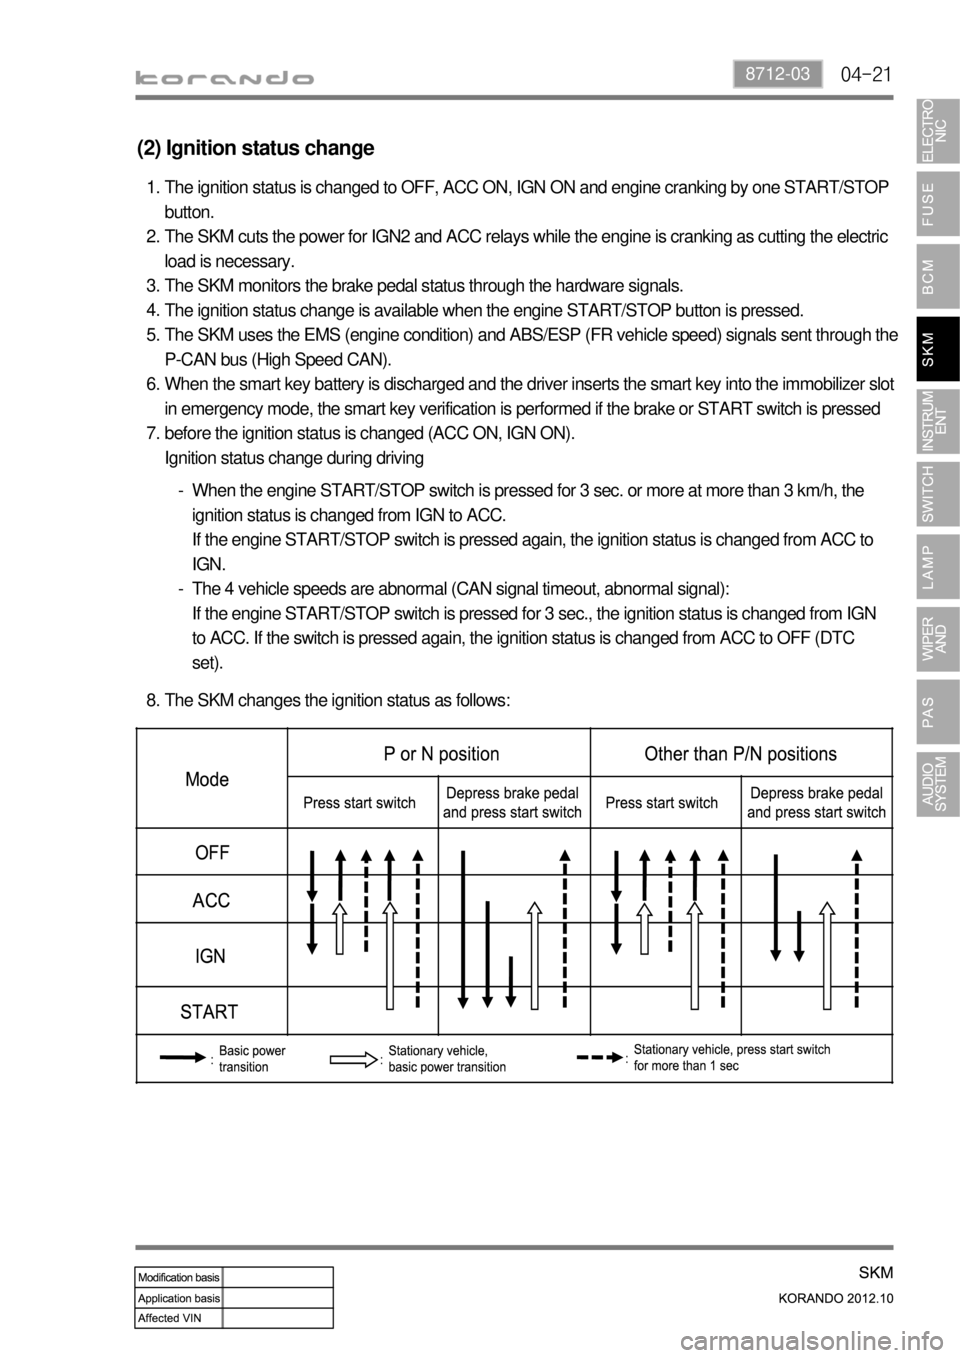 SSANGYONG KORANDO 2012  Service Manual 04-218712-03
(2) Ignition status change
The ignition status is changed to OFF, ACC ON, IGN ON and engine cranking by one START/STOP 
button.
The SKM cuts the power for IGN2 and ACC relays while the en